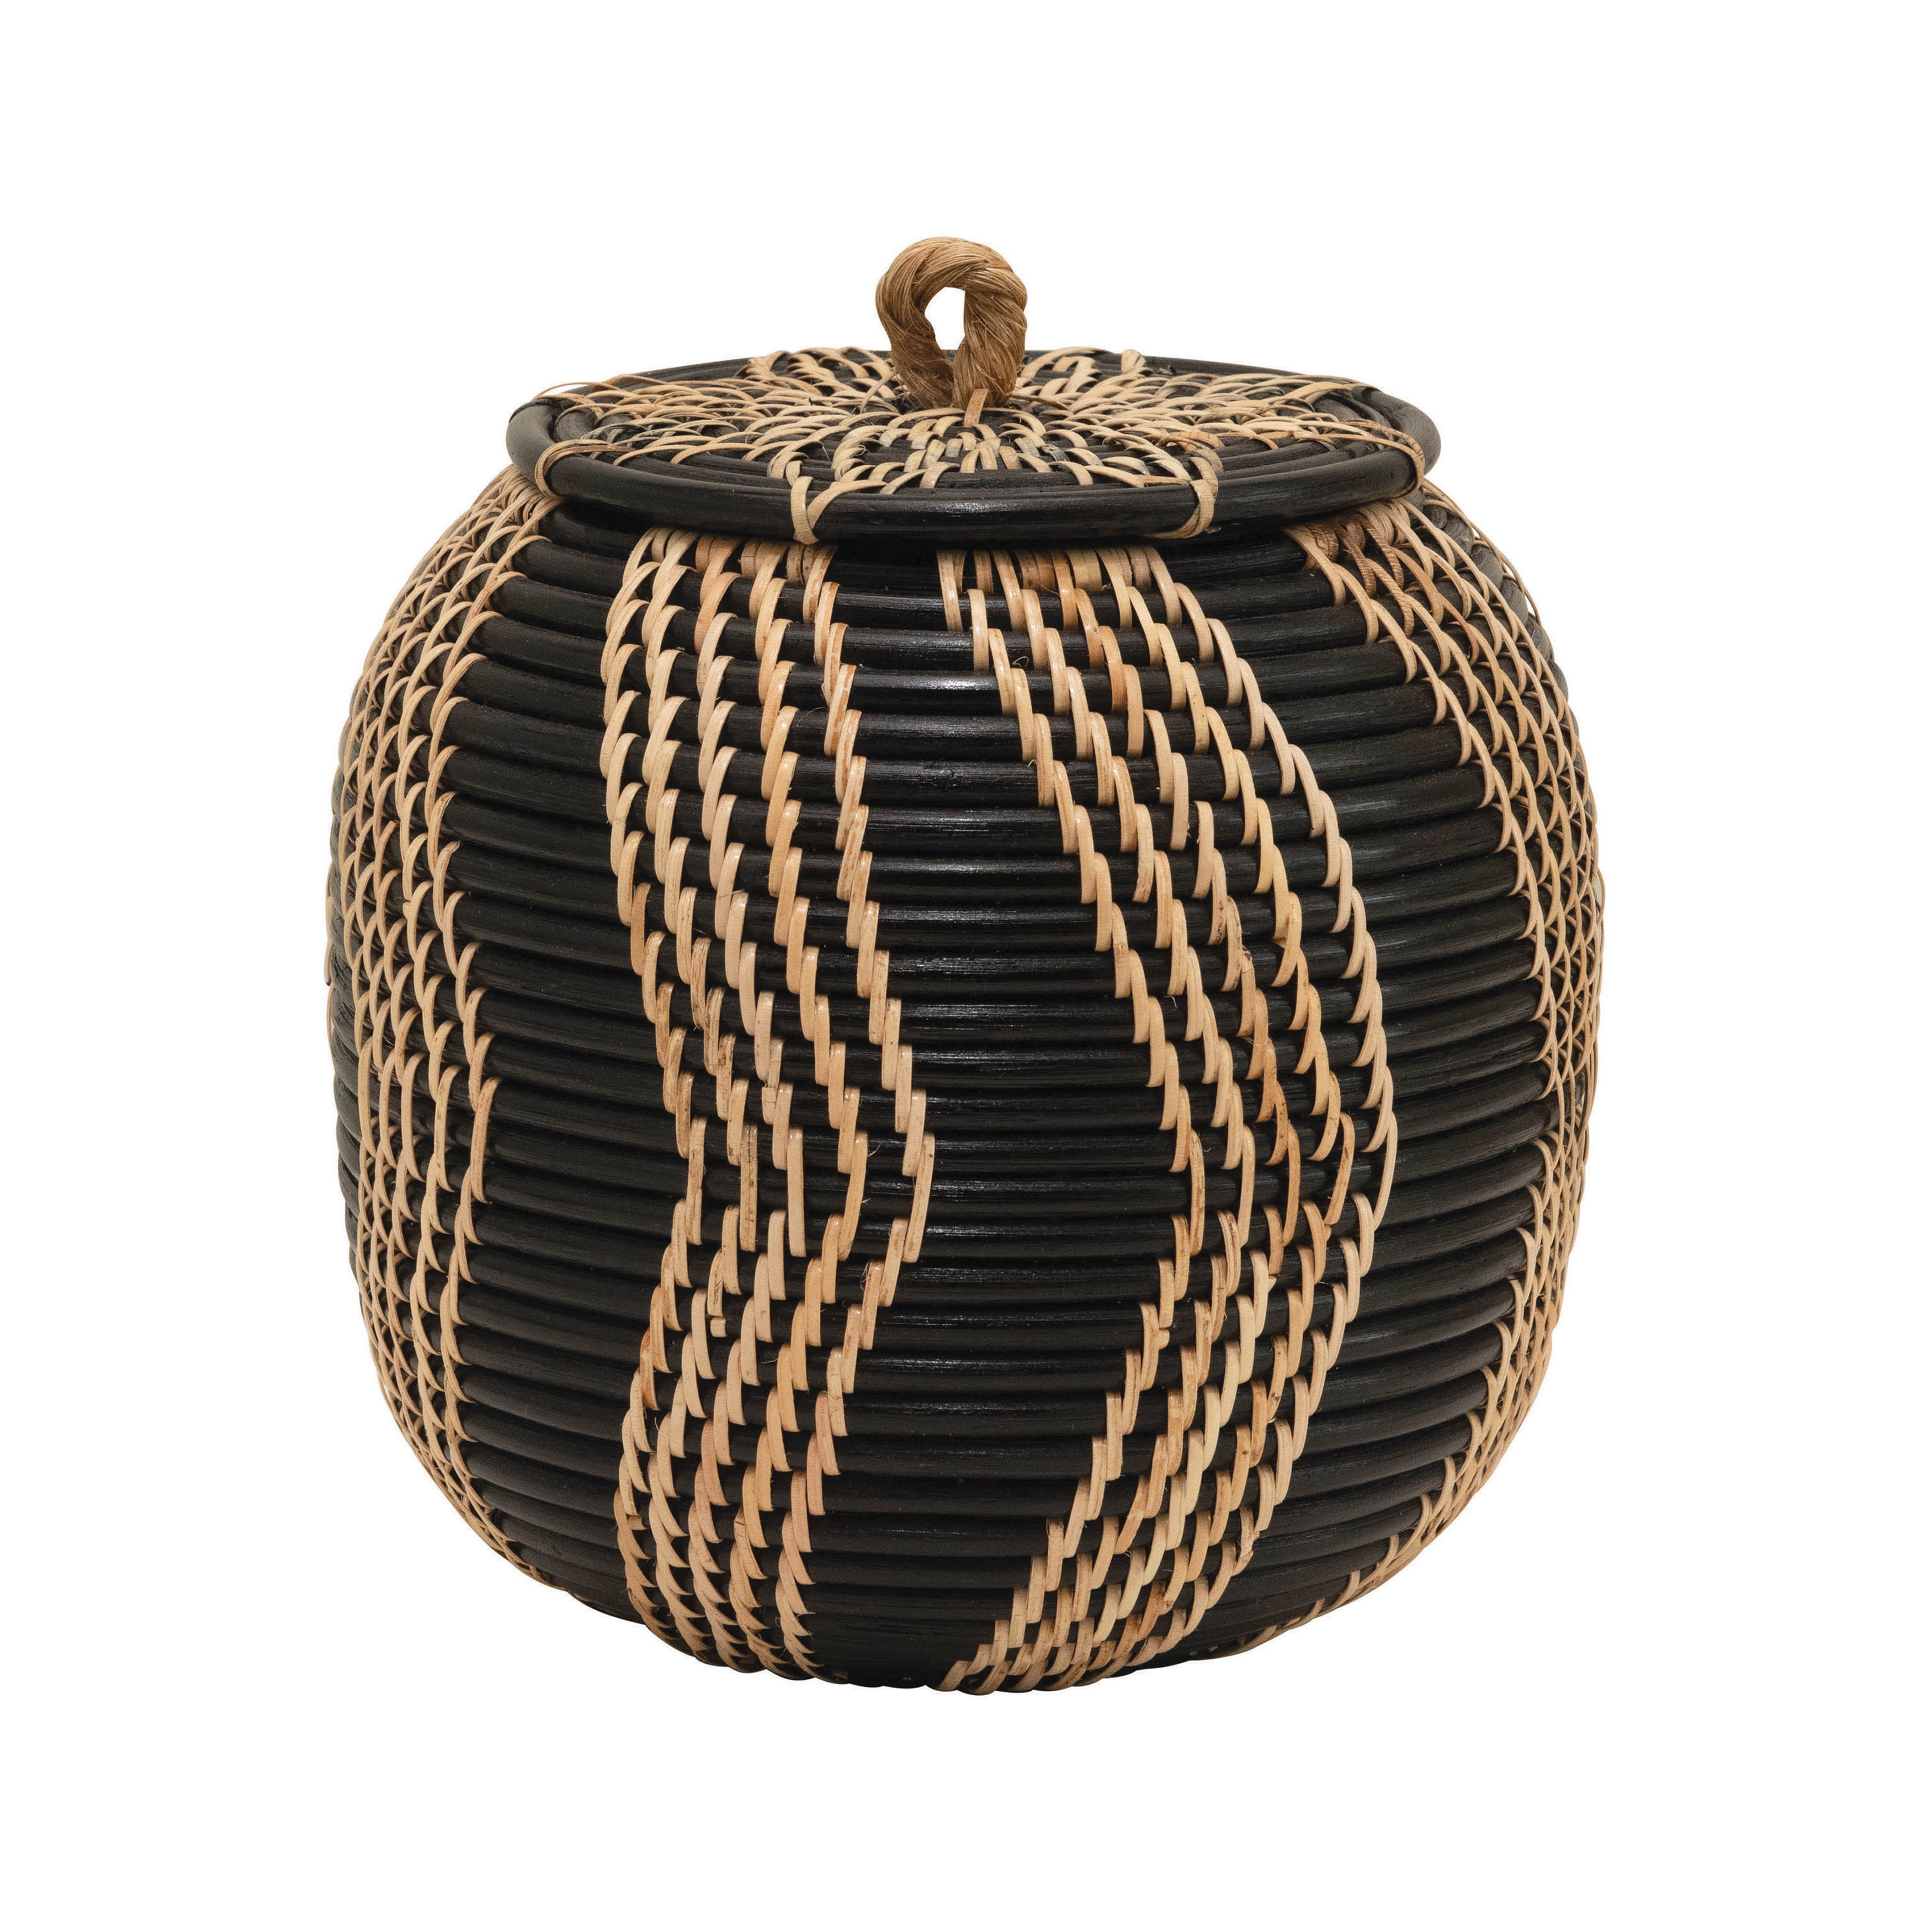 Hand-Woven Rattan Basket with Lid, Black & Natural - Image 0